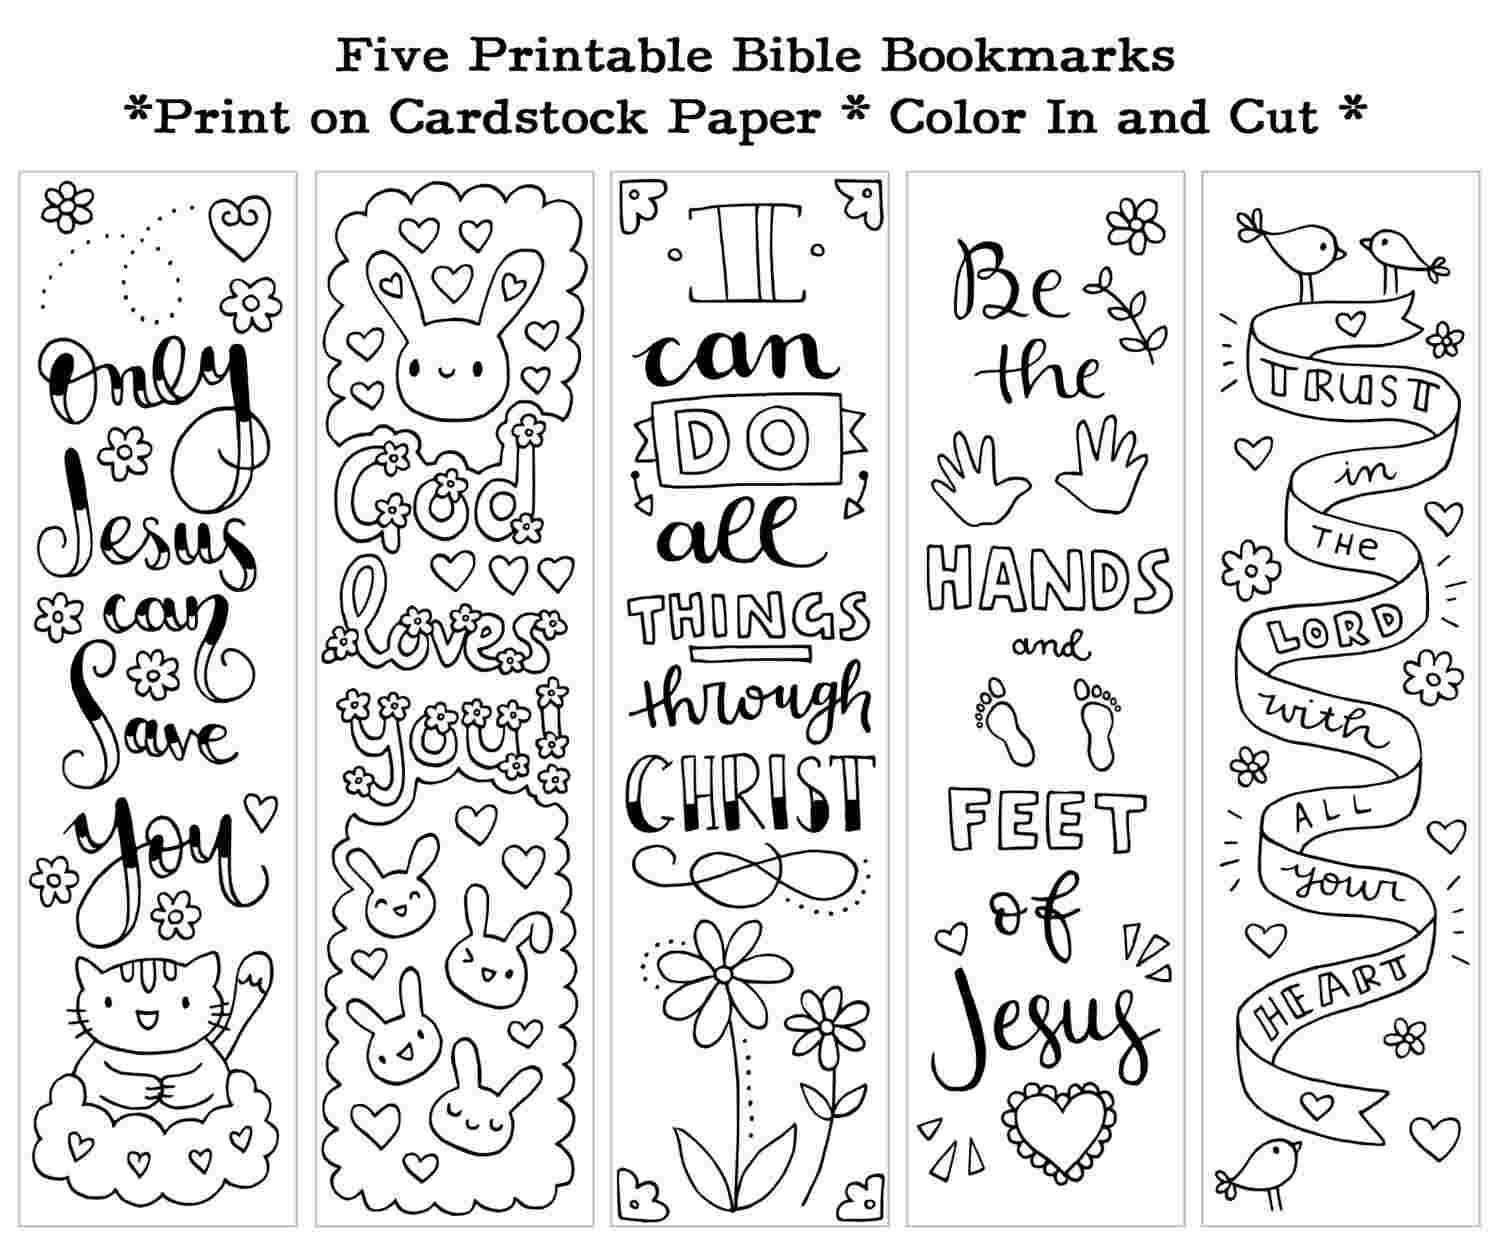 Coloring Pages : Free Printable Coloring Bookmarks Templates With Free Blank Bookmark Templates To Print